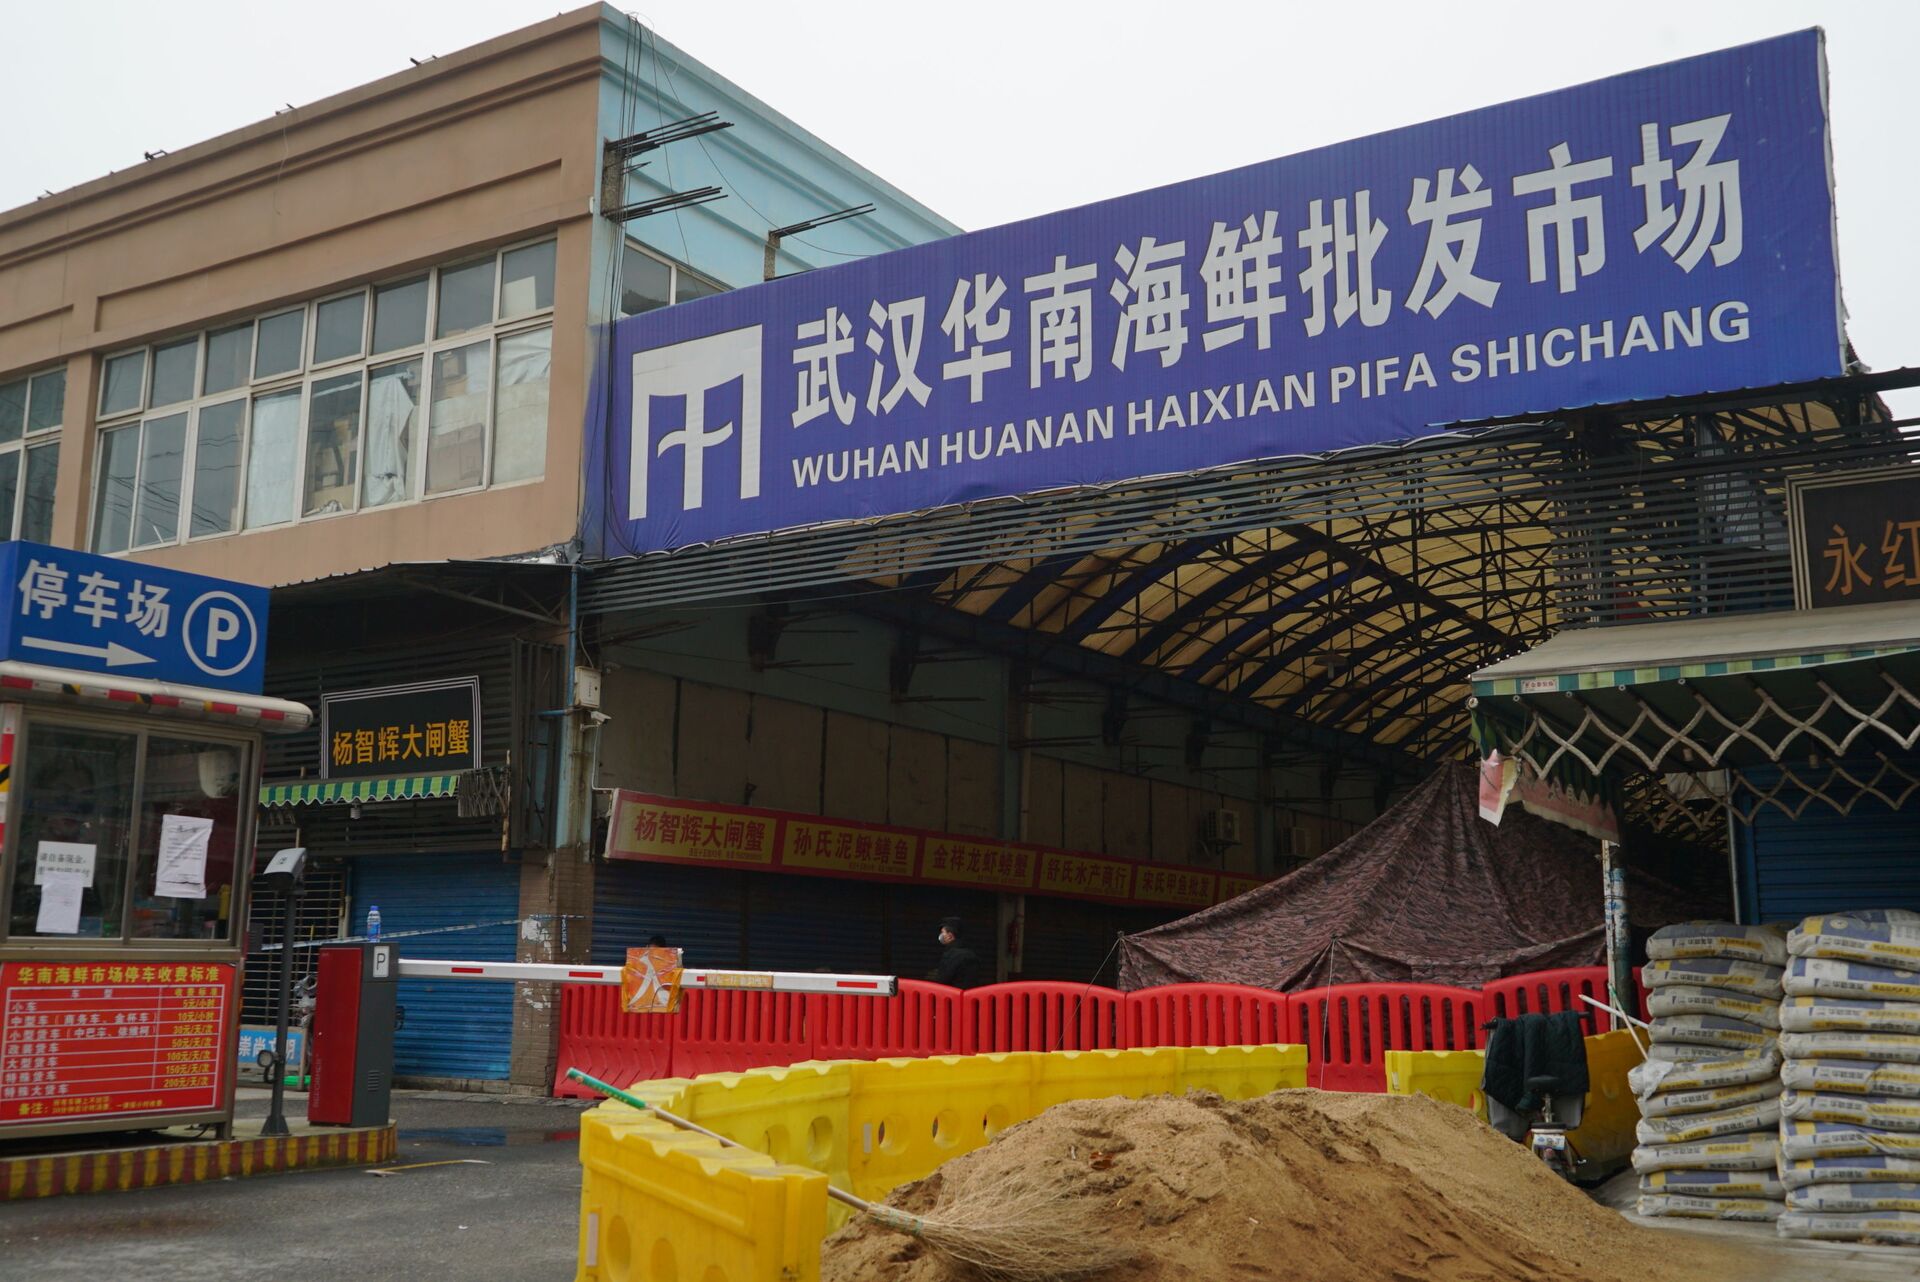 The Wuhan Huanan Wholesale Seafood Market, where a number of people related to the market fell ill with a virus, sits closed in Wuhan, China, Tuesday, Jan. 21, 2020. - Sputnik International, 1920, 07.09.2021